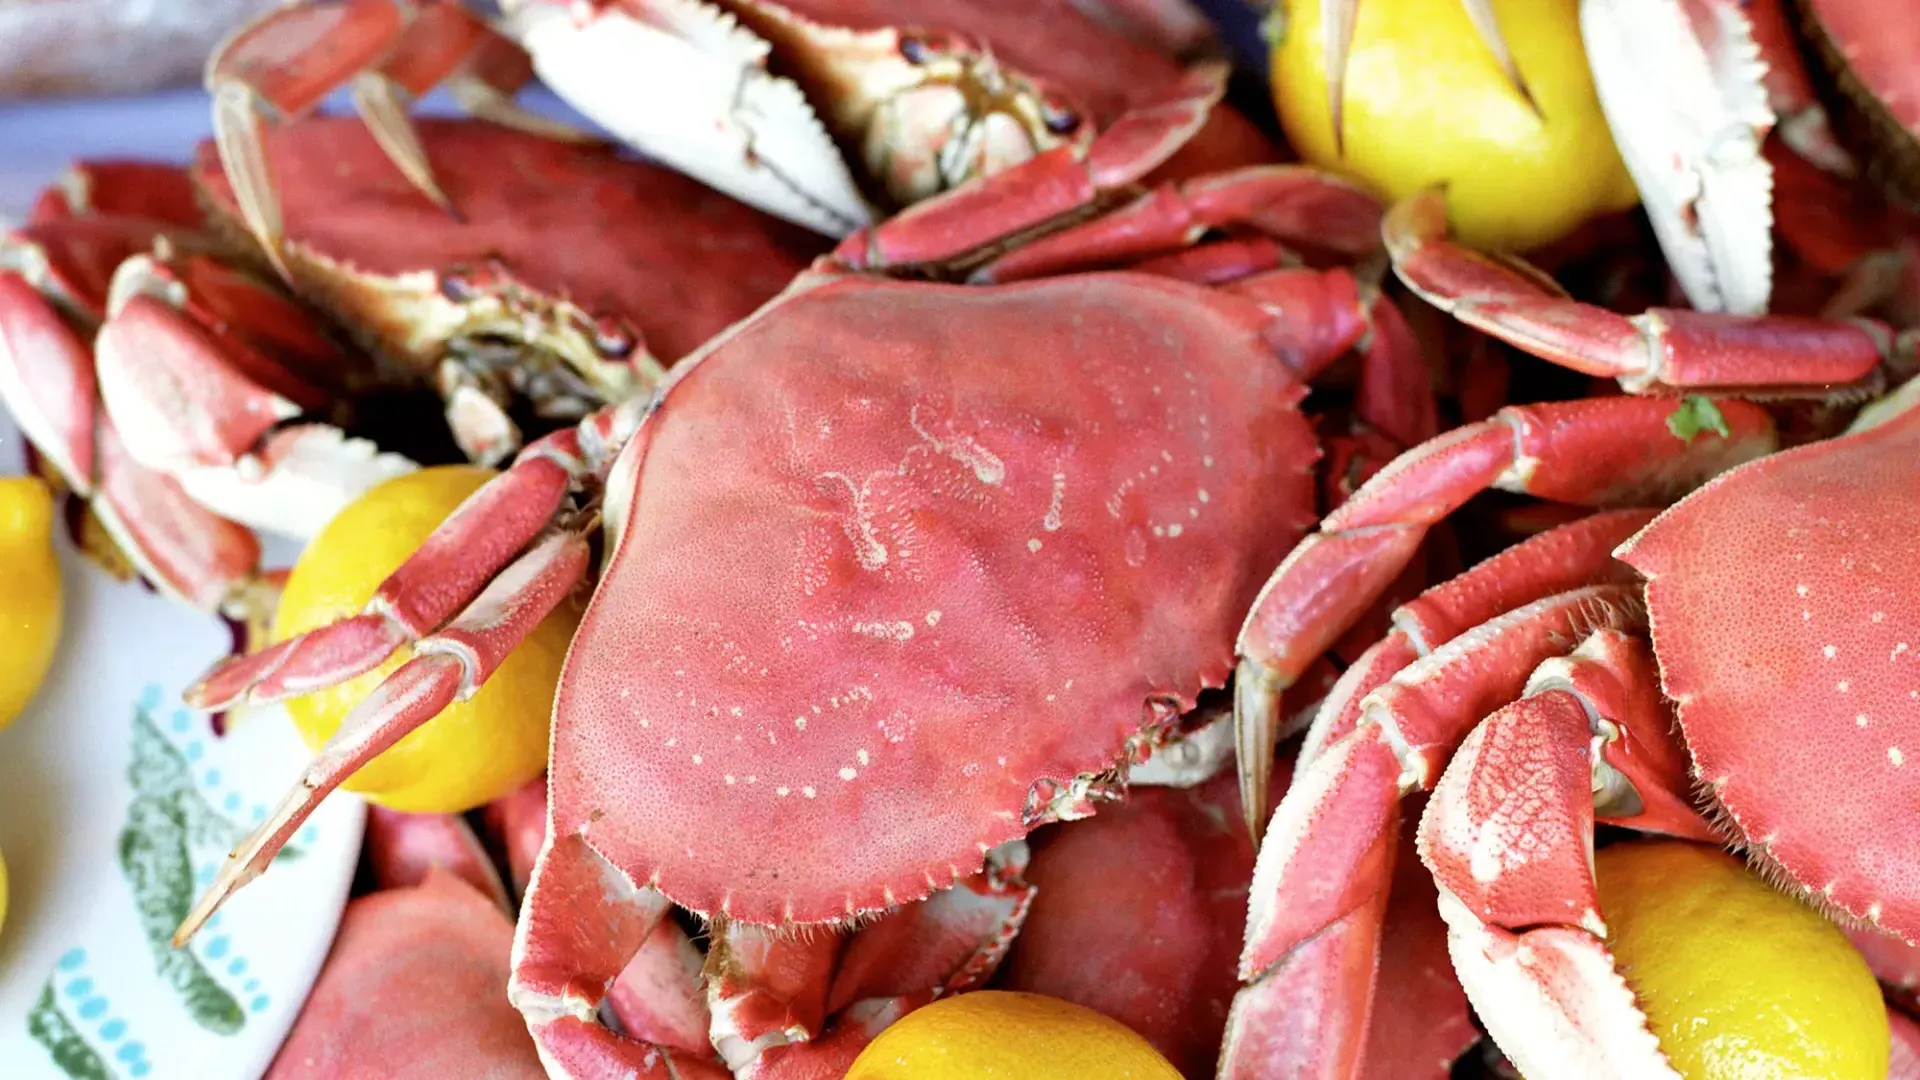 Close-up shot of a pile of cooked crabs with lemon slices on a platter.